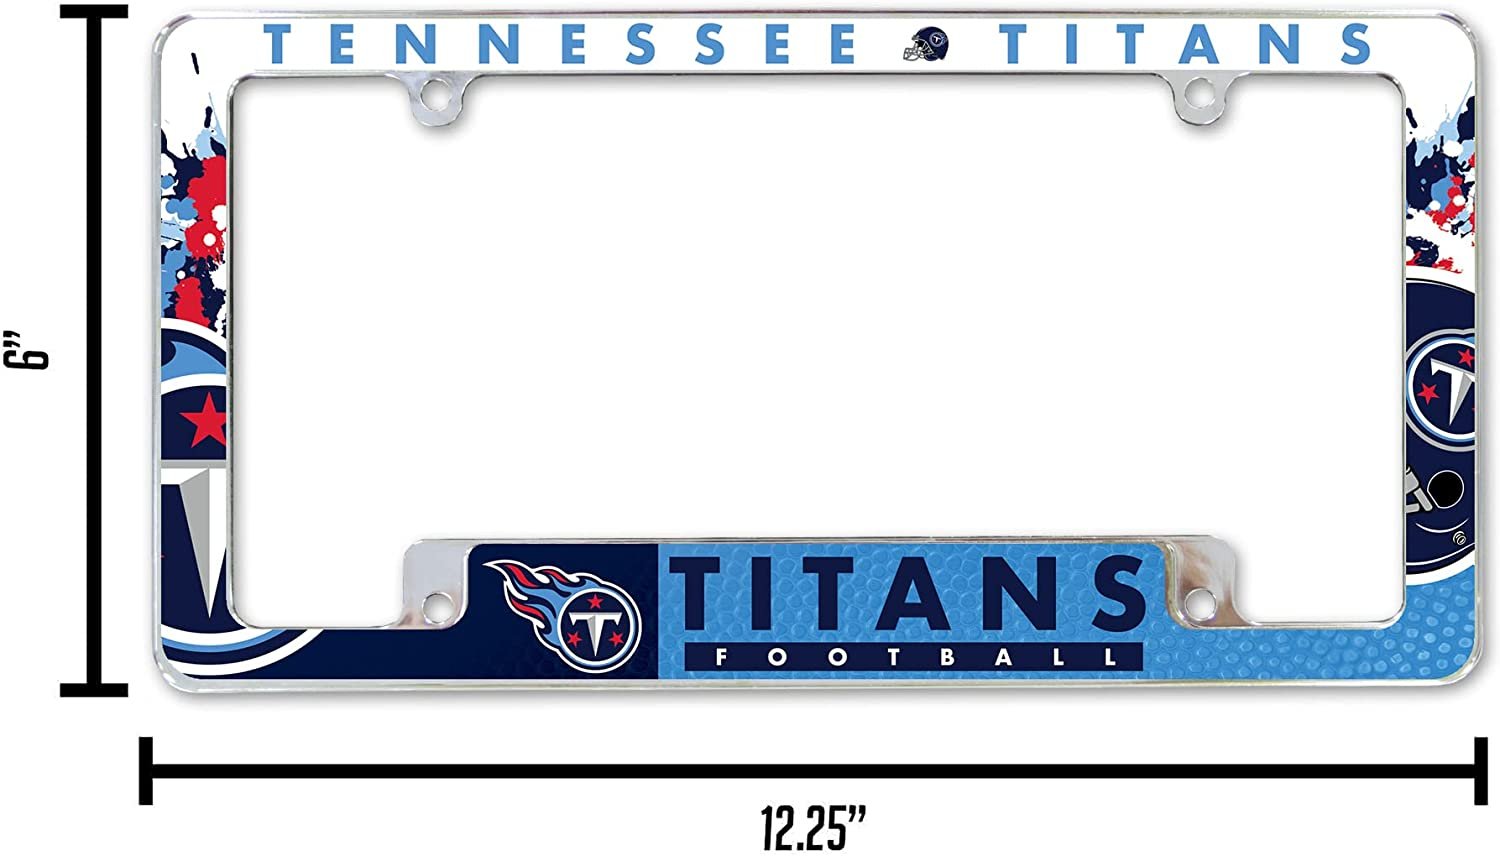 Tennessee Titans Metal License Plate Frame Chrome Tag Cover All Over Design 6x12 Inch